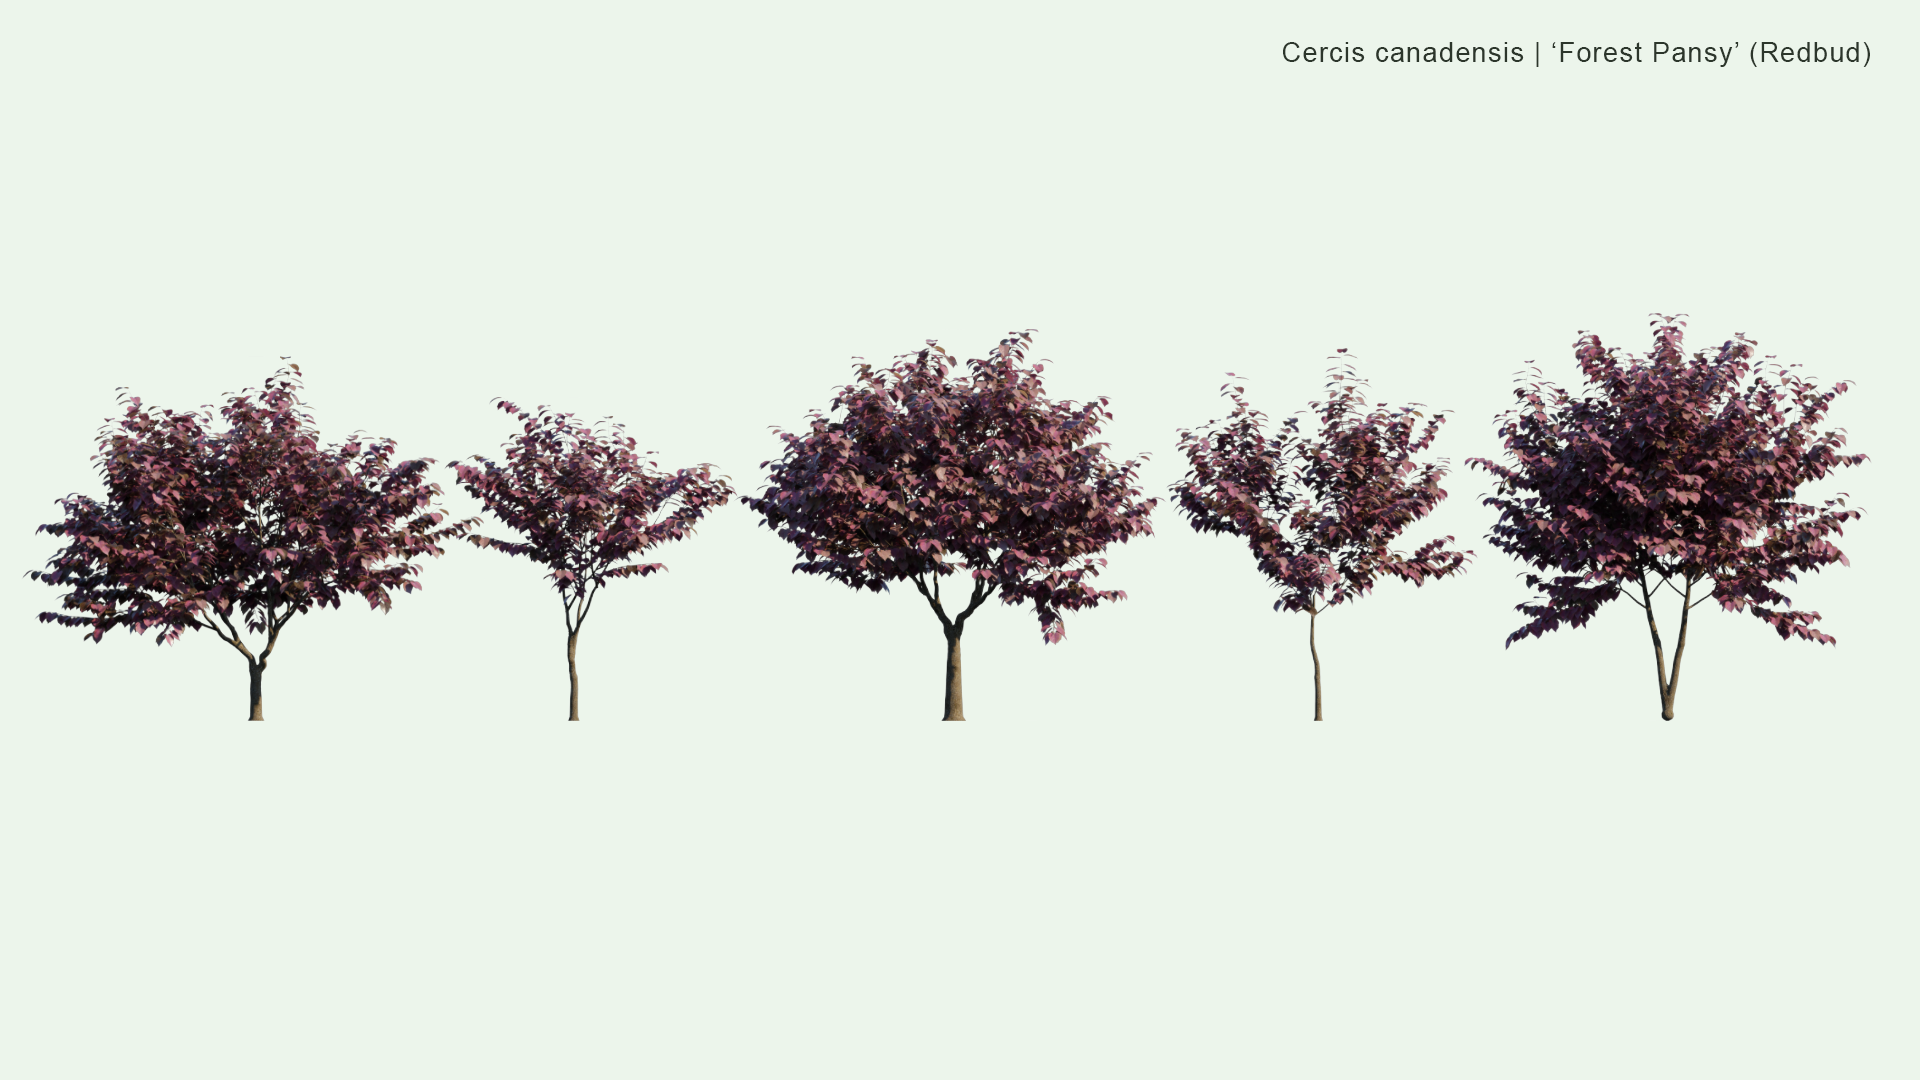 2D Cercis Canadensis - 'Forest Pansy' (Redbud)